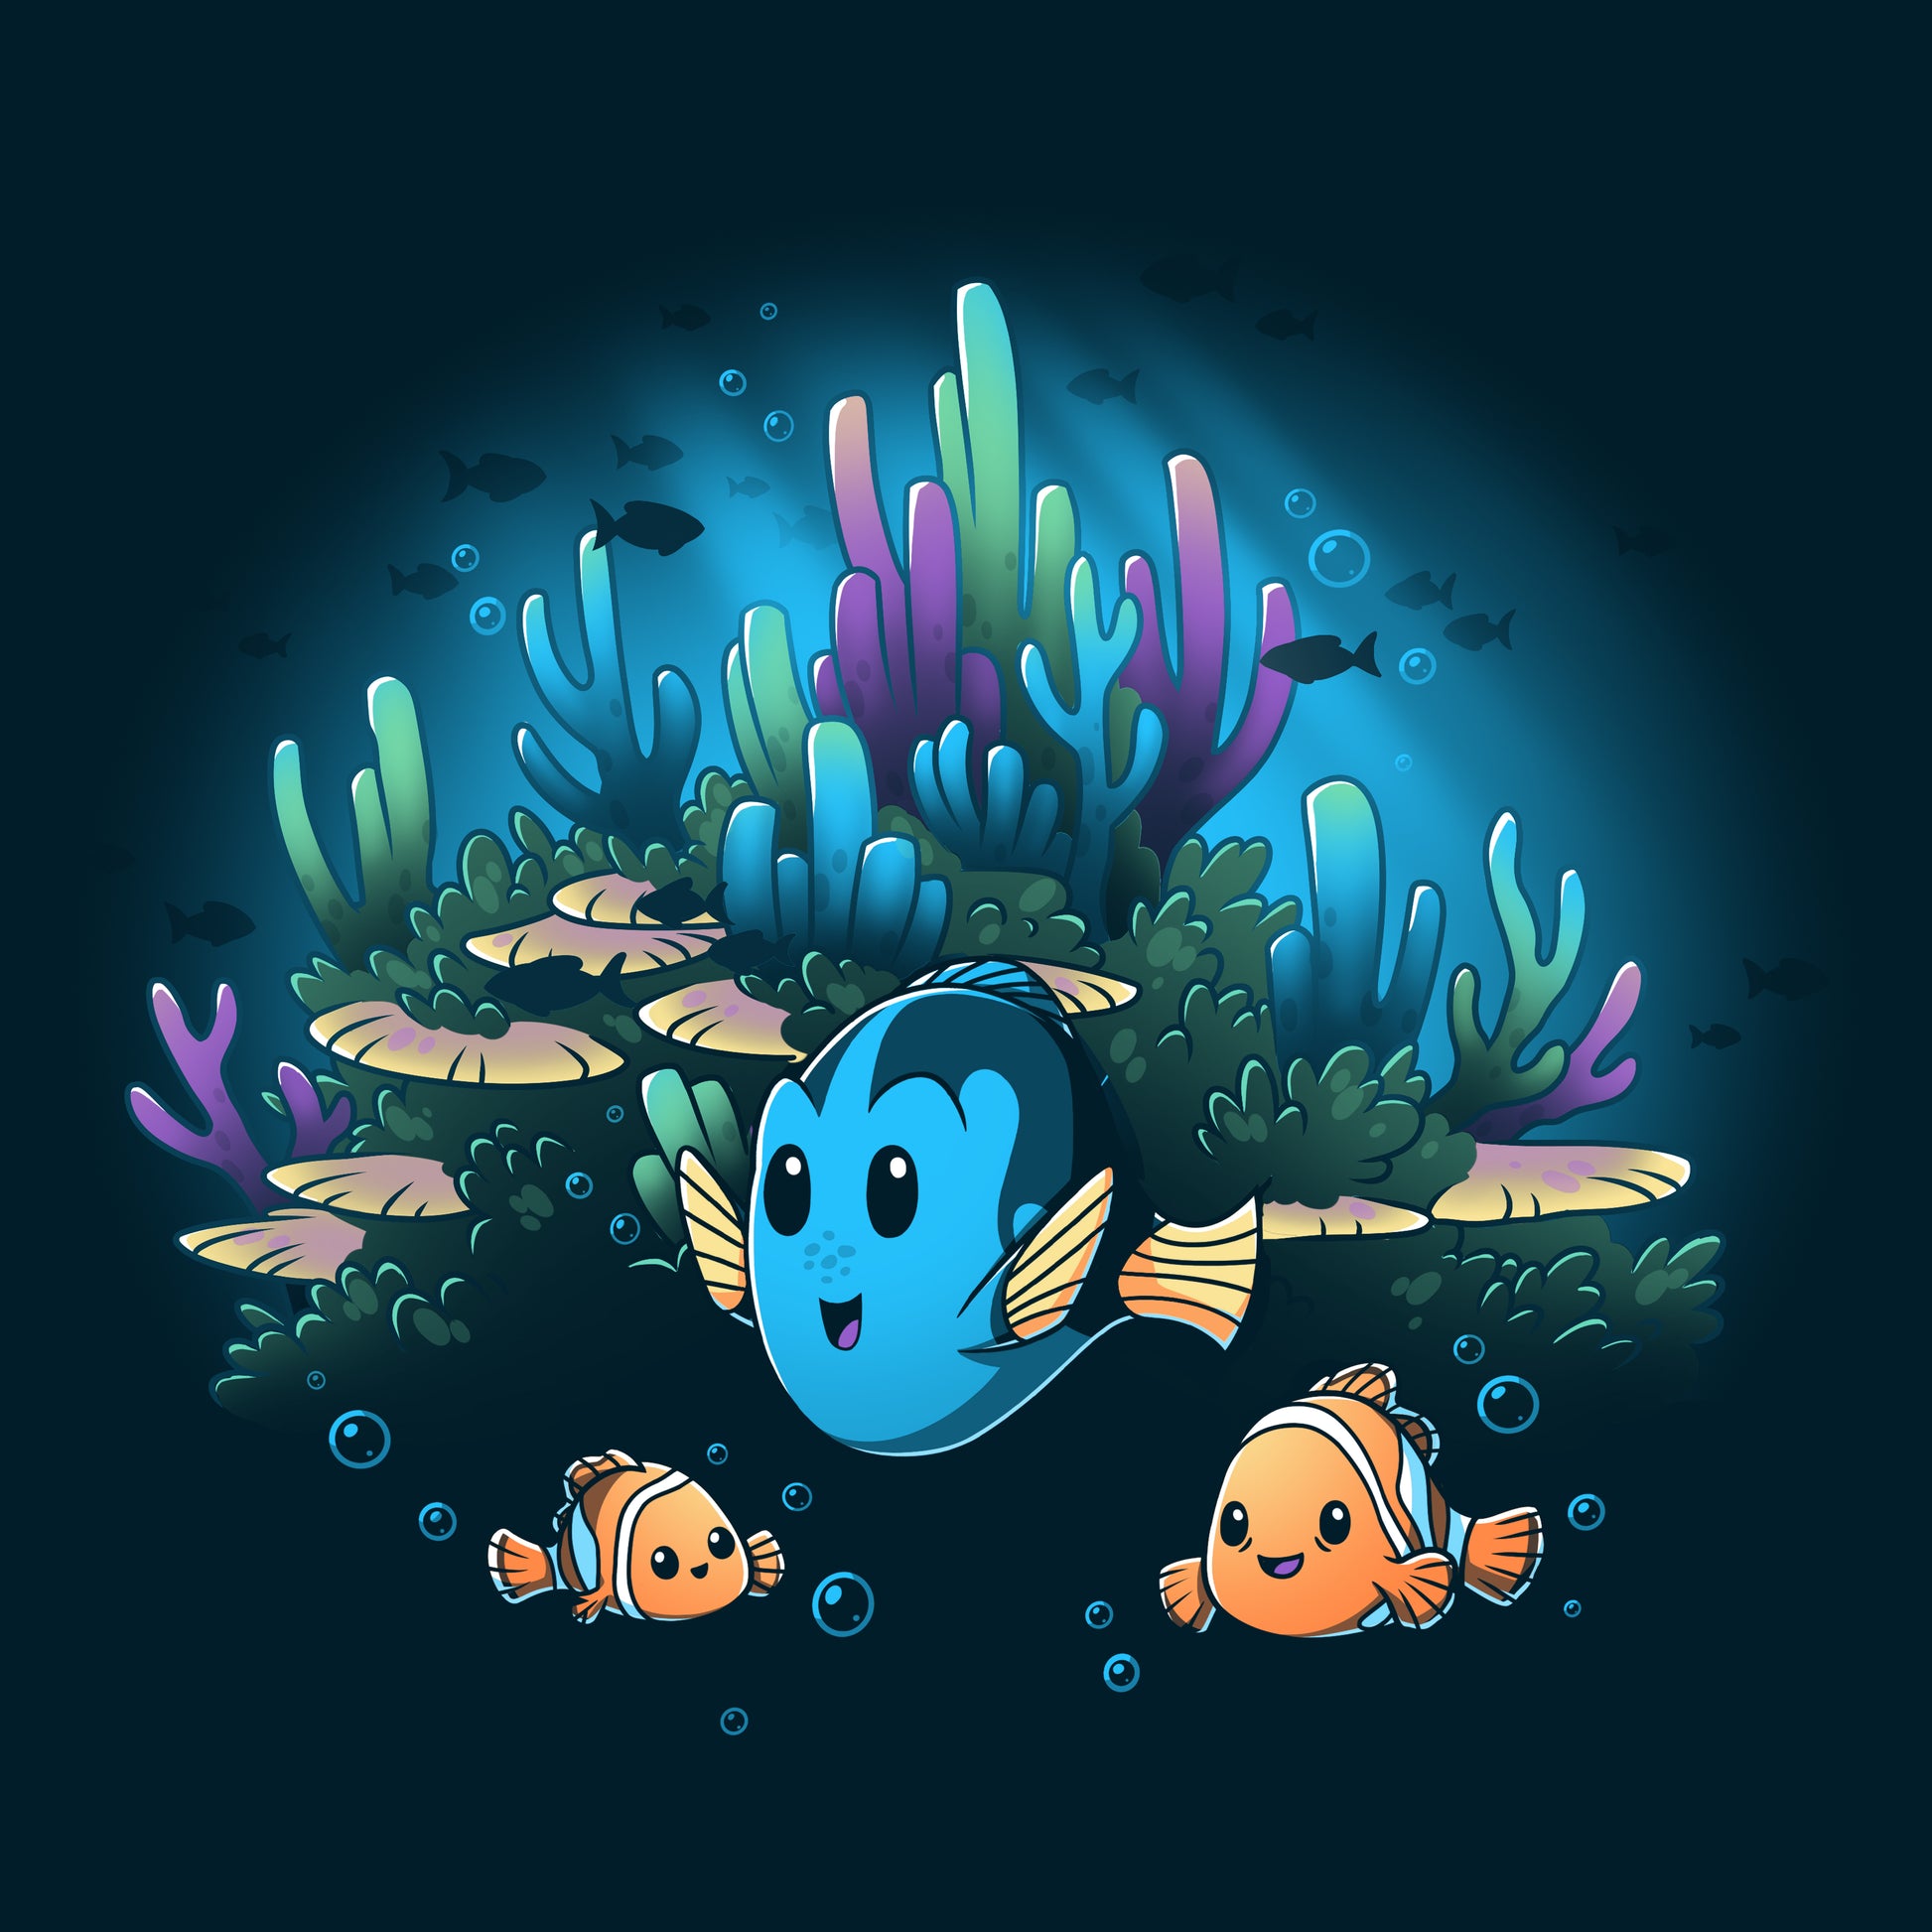 Officially licensed Pixar's Finding Nemo Marlin, Nemo and Dory tee.